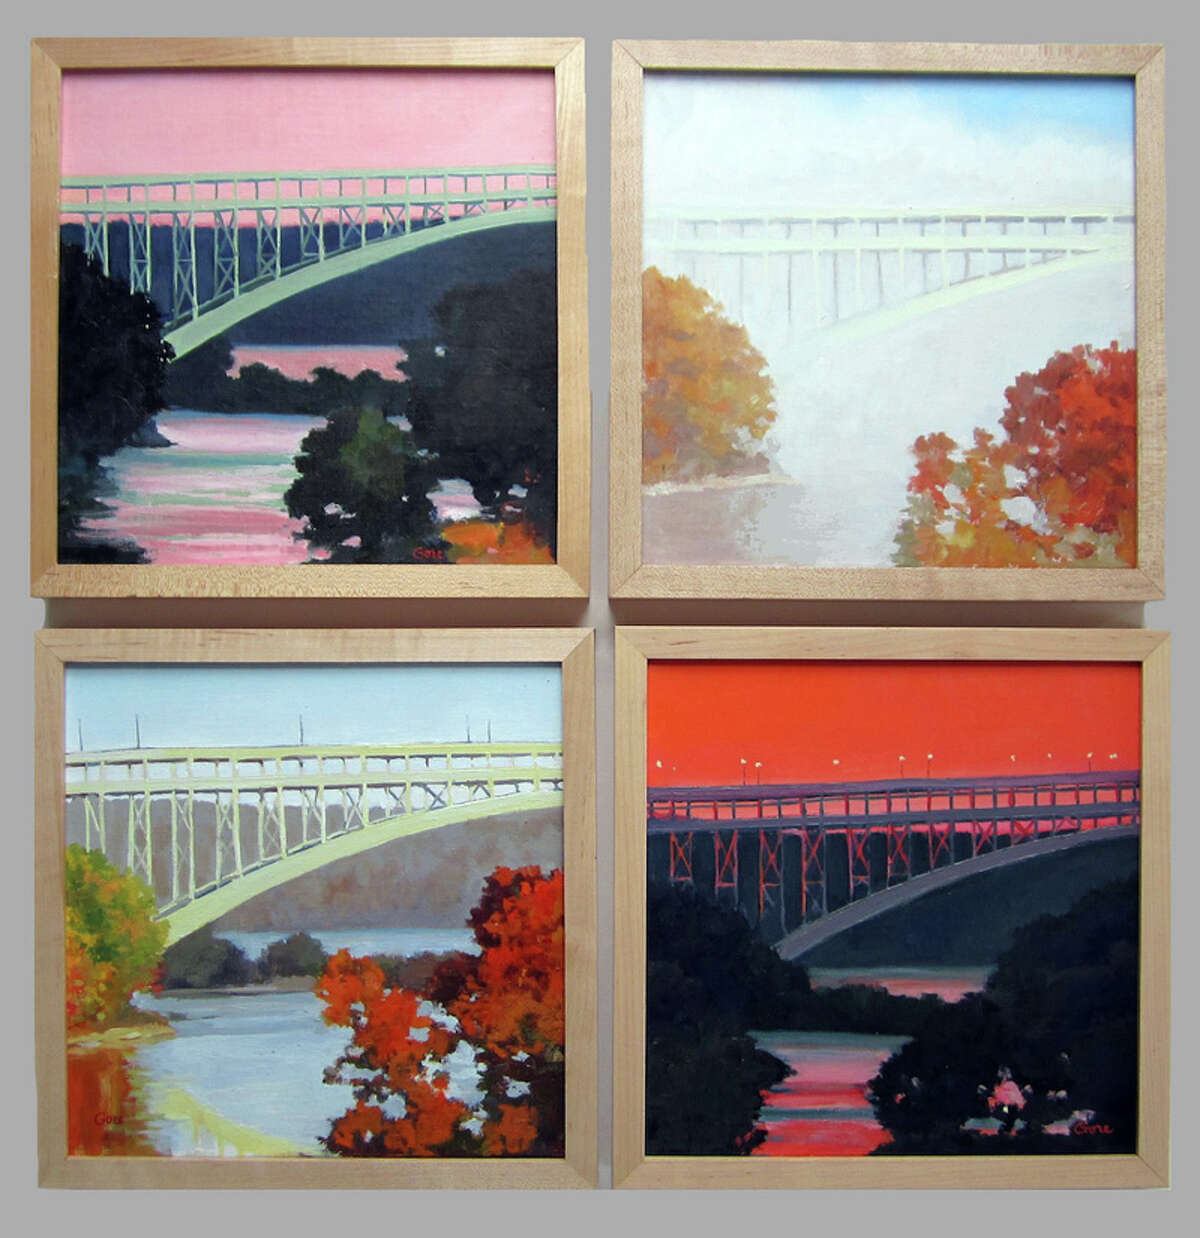 WINDHAM FINE ARTS ?Bridge Studies? by Elissa Gore are among the works in ?Barns and Bridges? at Windham Fine Arts Saturday through March 31. There will be a reception from 4 to 6 p.m. on Saturday.